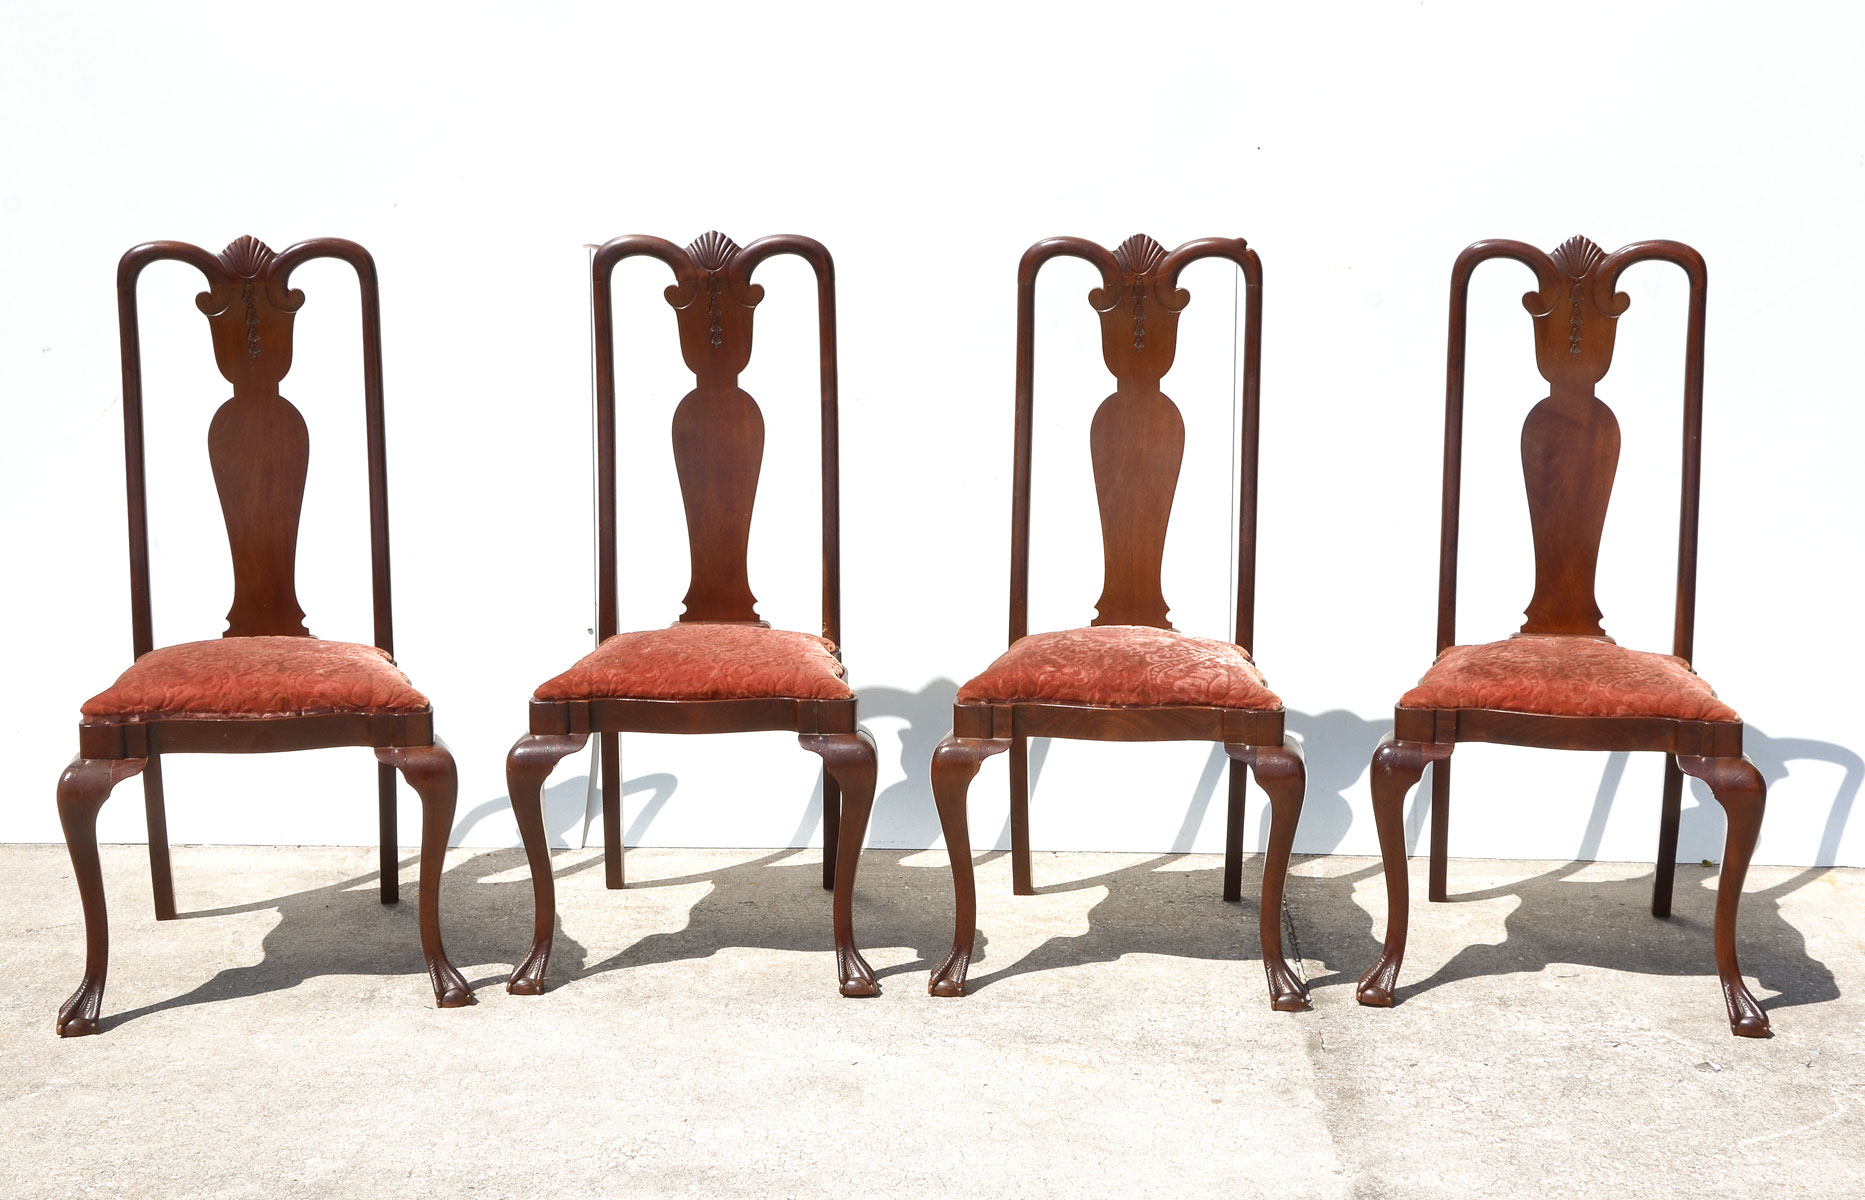 4 CHIPPENDALE CHAIRS: Chippendale